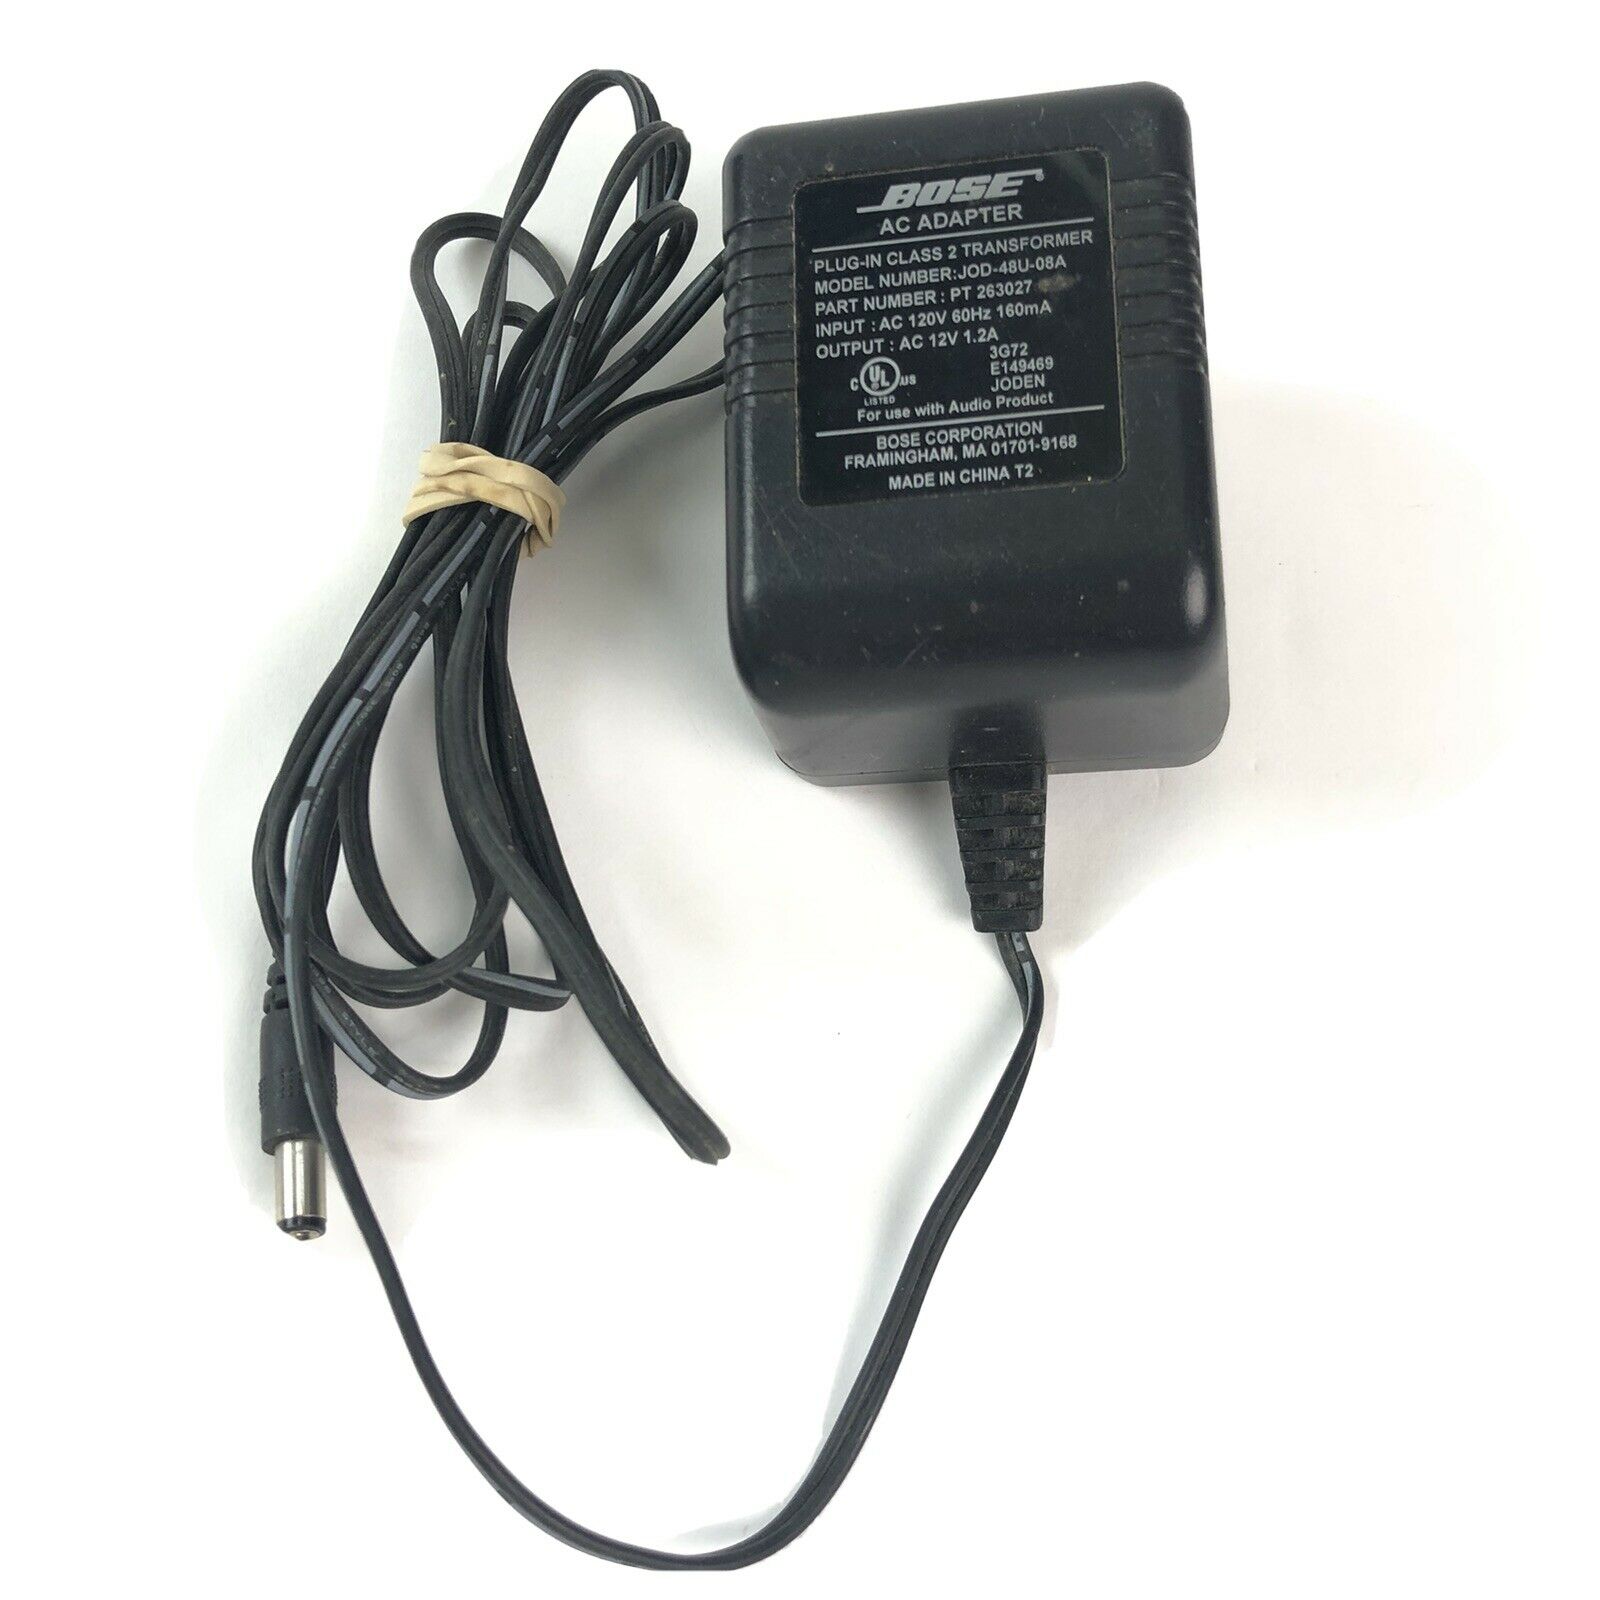 BOSE AC Adapter JOD-48U-08A 12V 1.2A PT 263027 Companion 2 Power Supply Connection Split/Duplication: 1:2 Type: AC/A - Click Image to Close